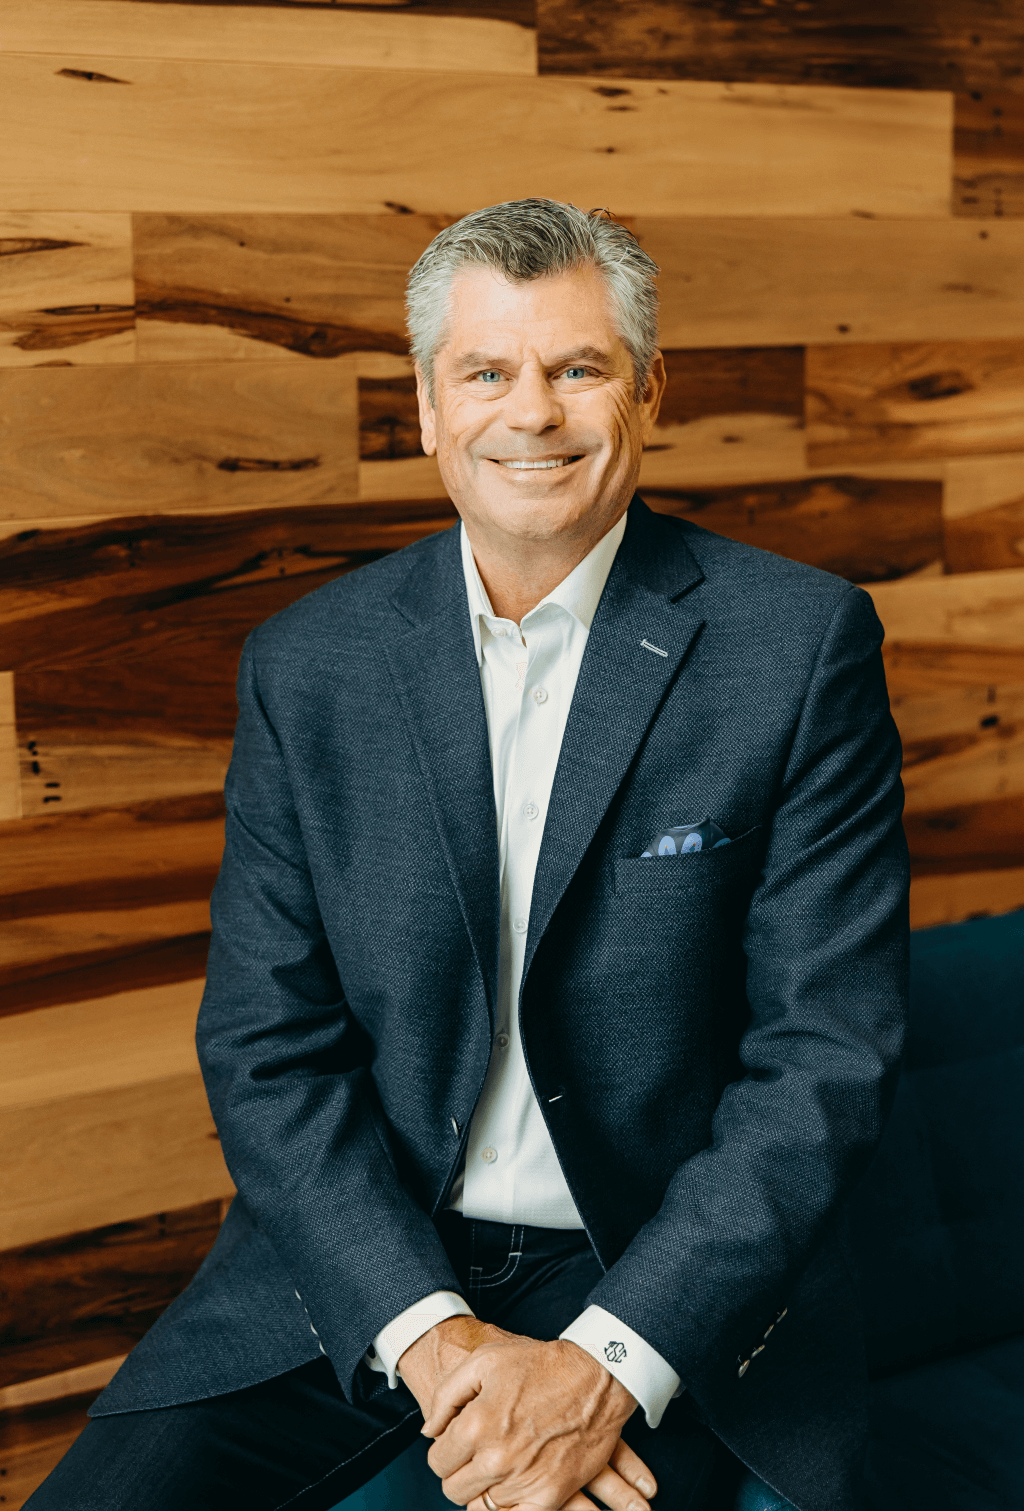 Introducing Tim Smith, Lineage's Chief Commercial Officer and a member of the Lineage leadership team.